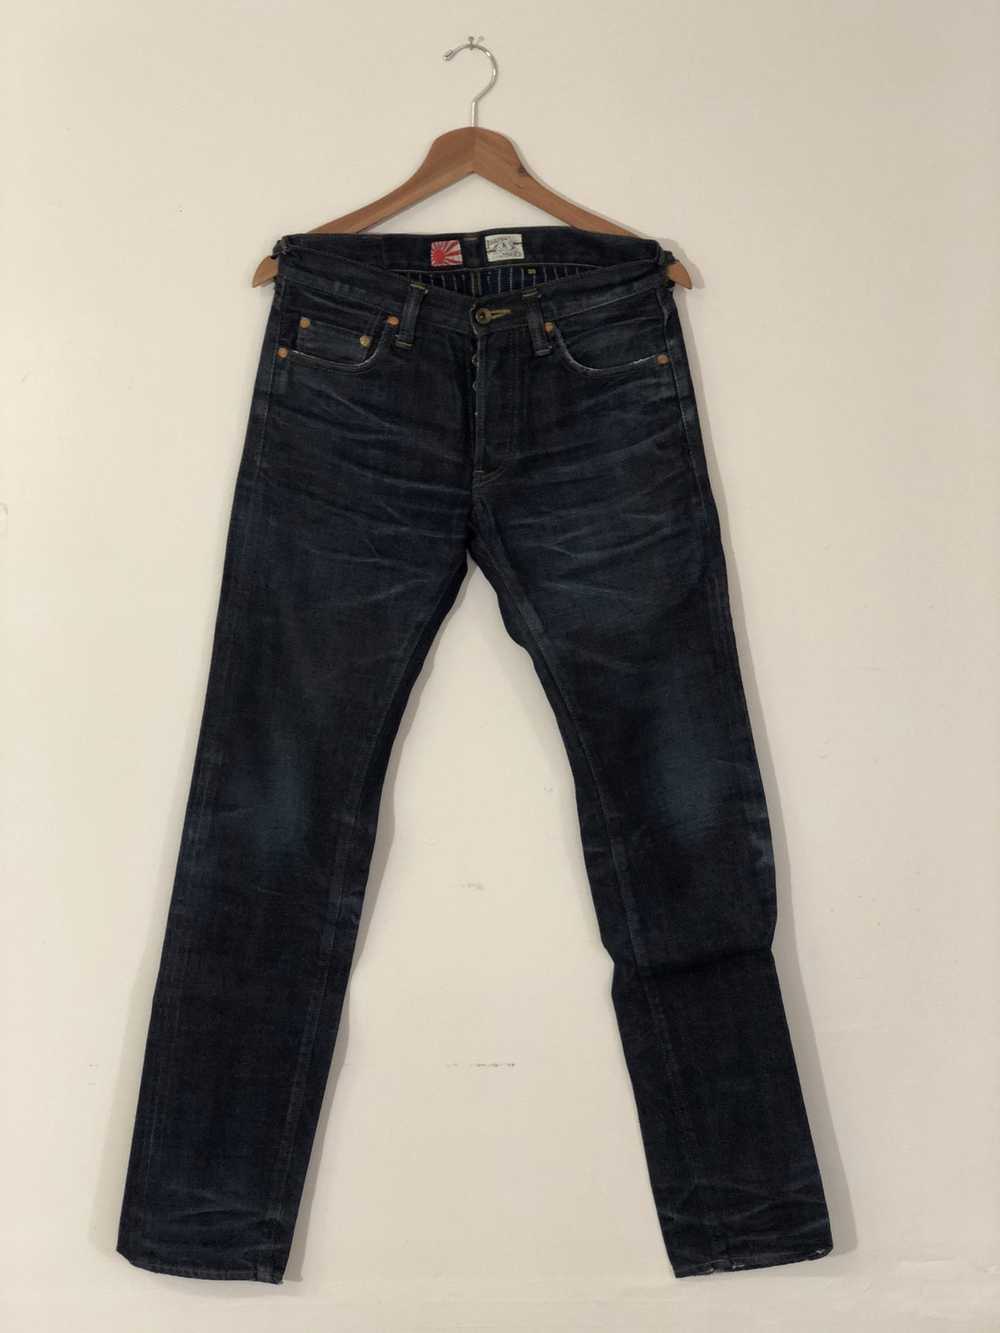 NWT black label purple brand jeans made in Italy 32 waist $500